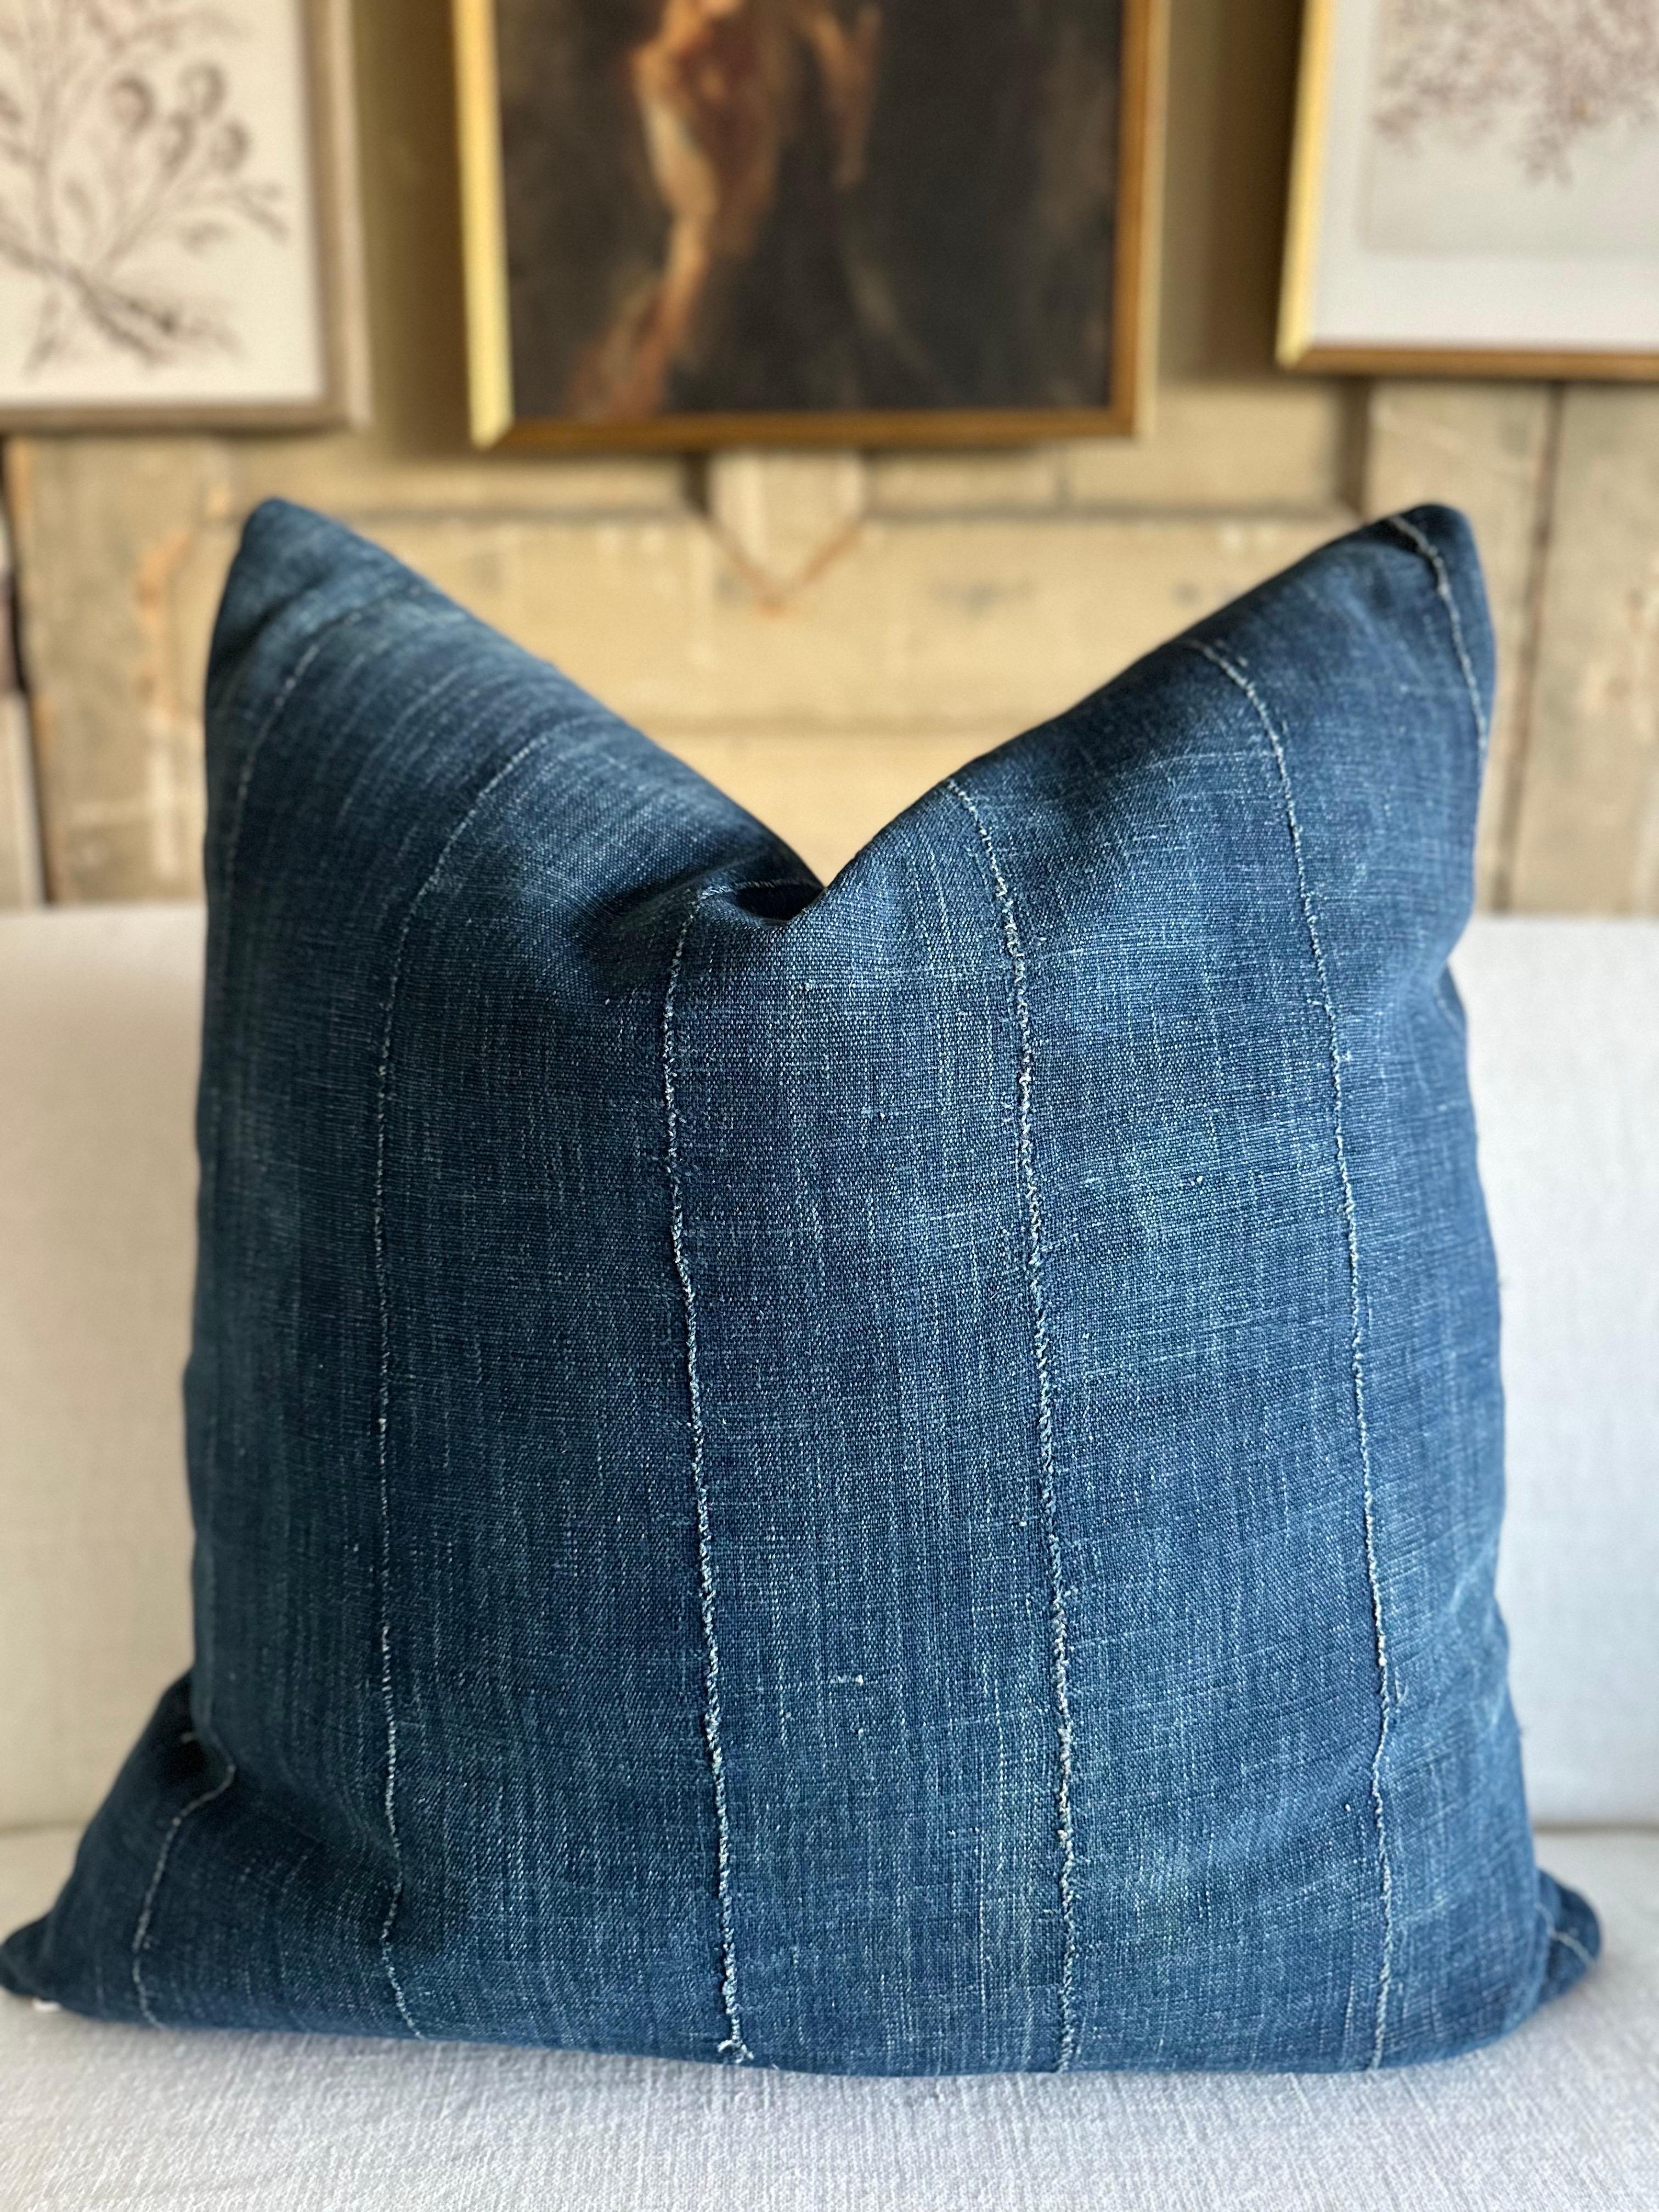 Indigo Blue Lumbar Antique Japanese Boro Fabric Shams
Size: 26x26
Does not include insert
Original stitched panels in faded indigo blues, we have added a backing to the fabric for everyday use.
High Quality Antique Brass Zipper Closure.
Hand Made